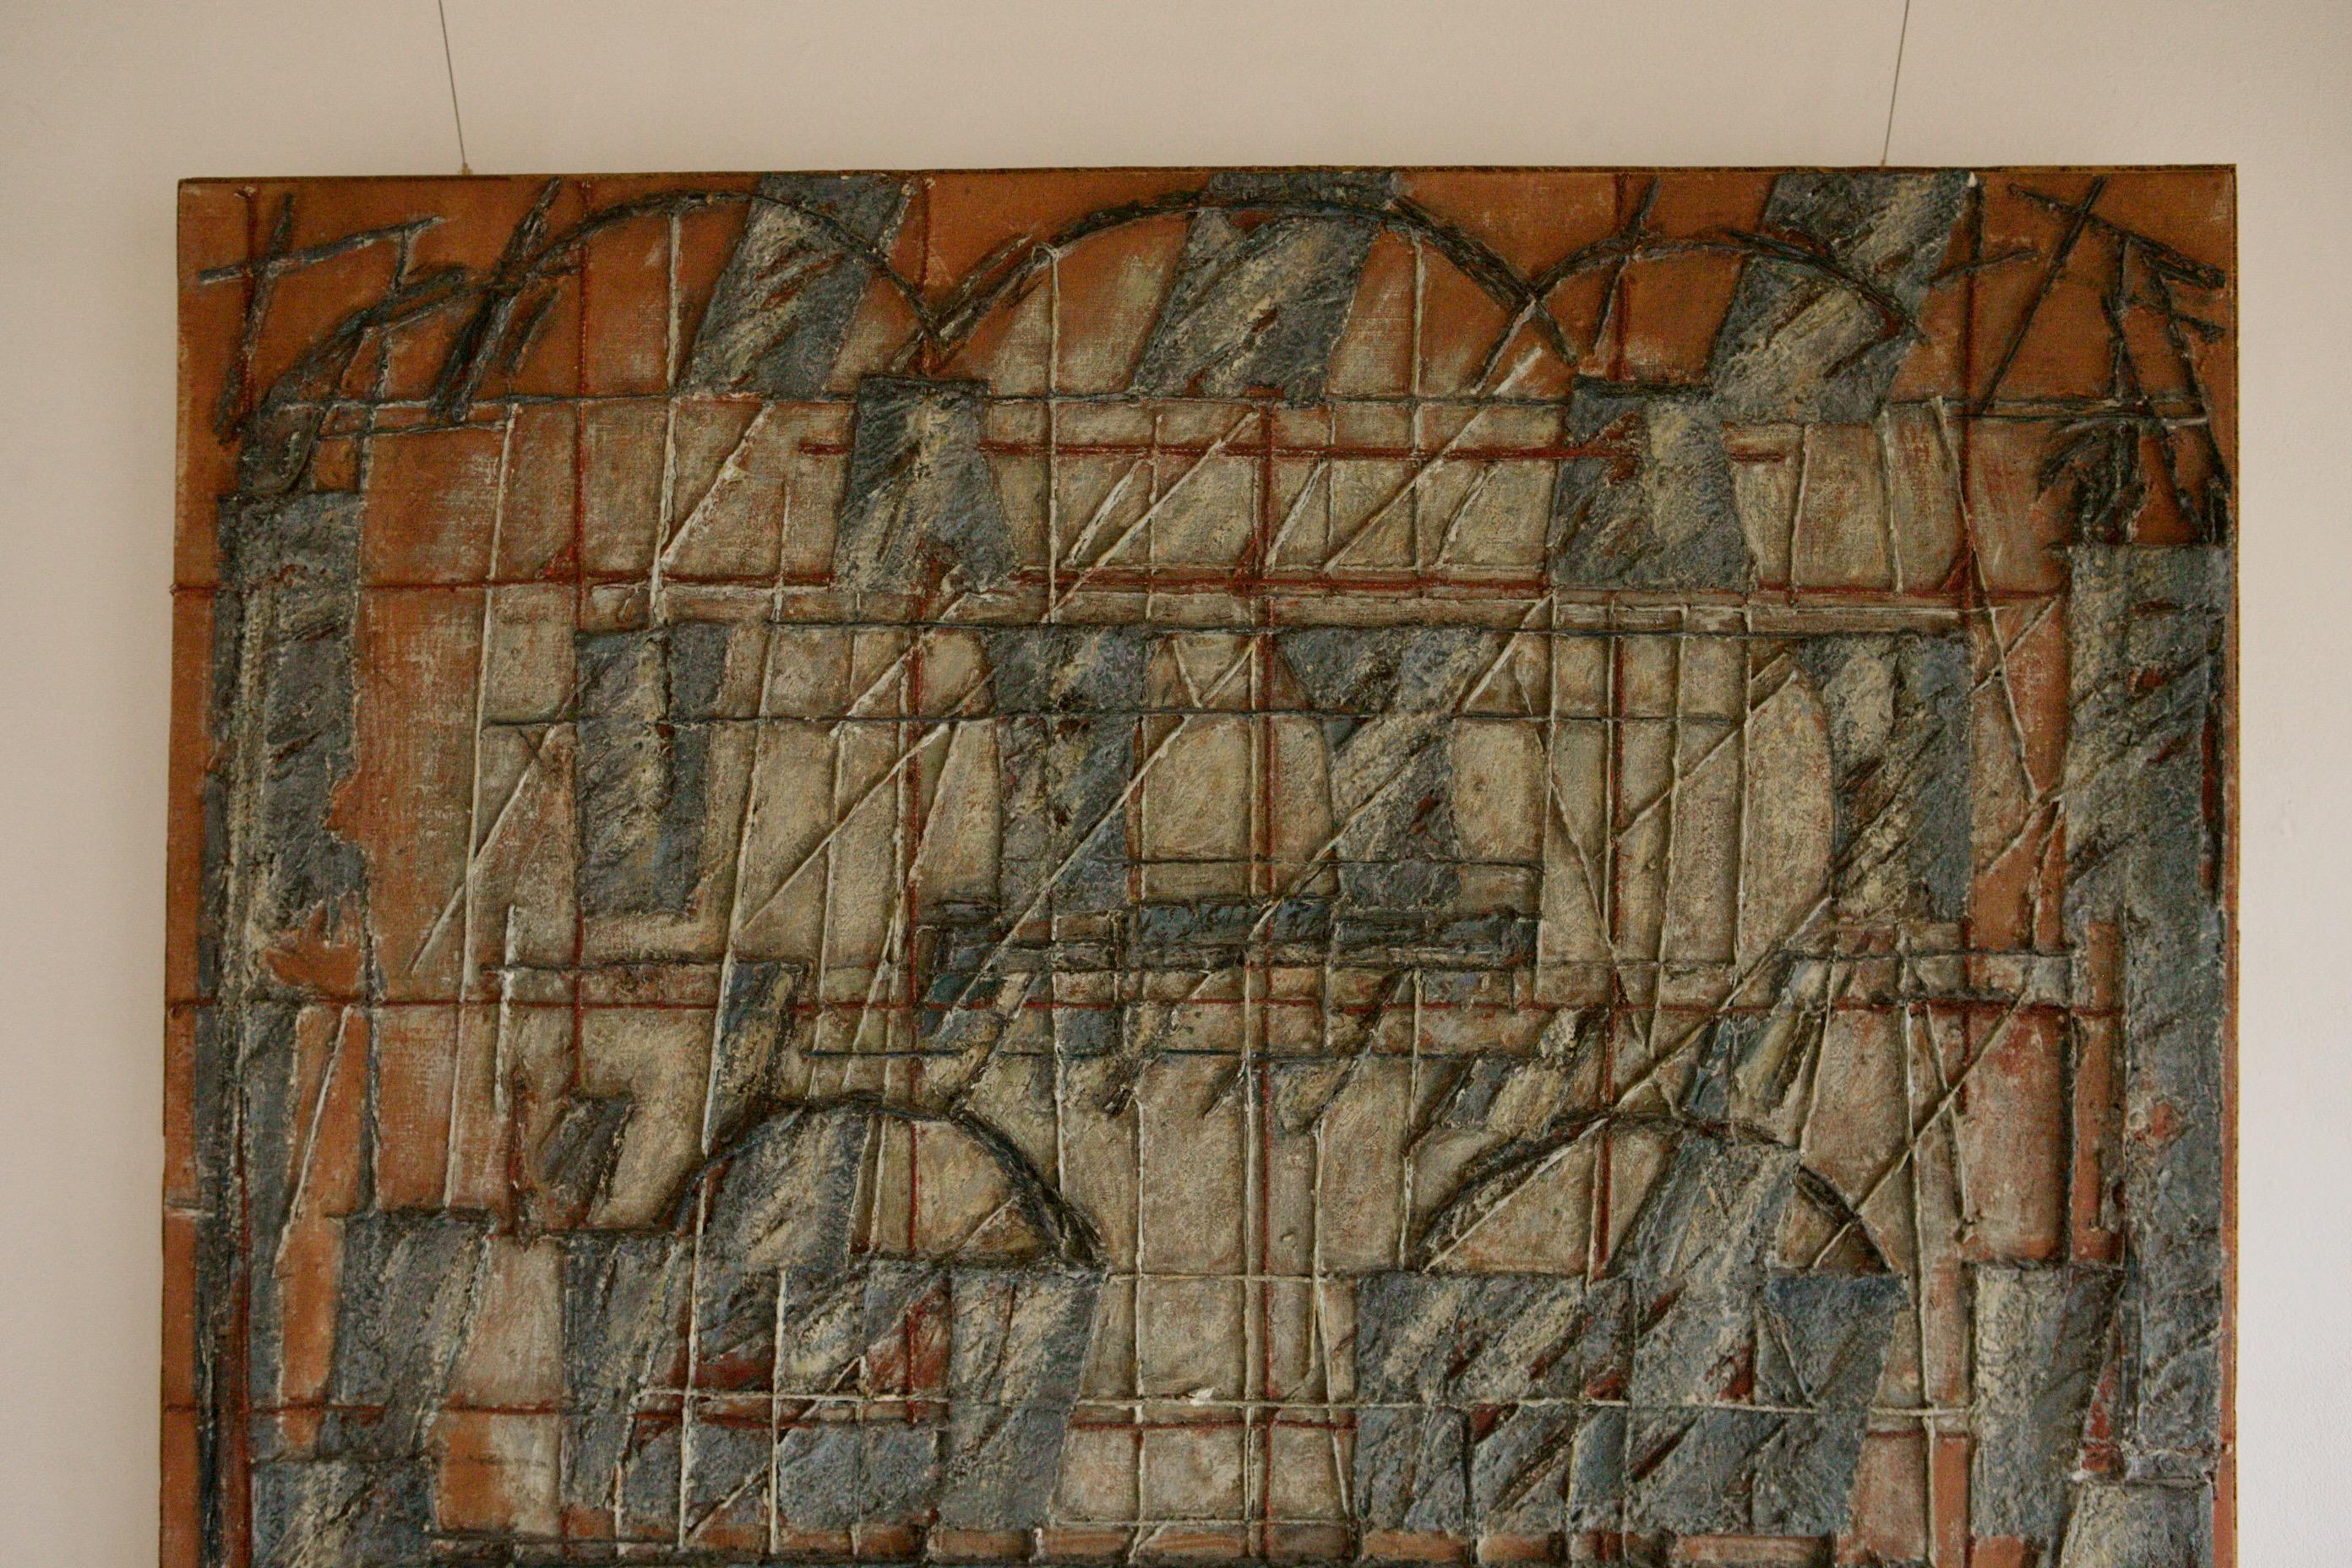 Brutalist mixed media 1981. Oil, String and Paper on Canvas 1